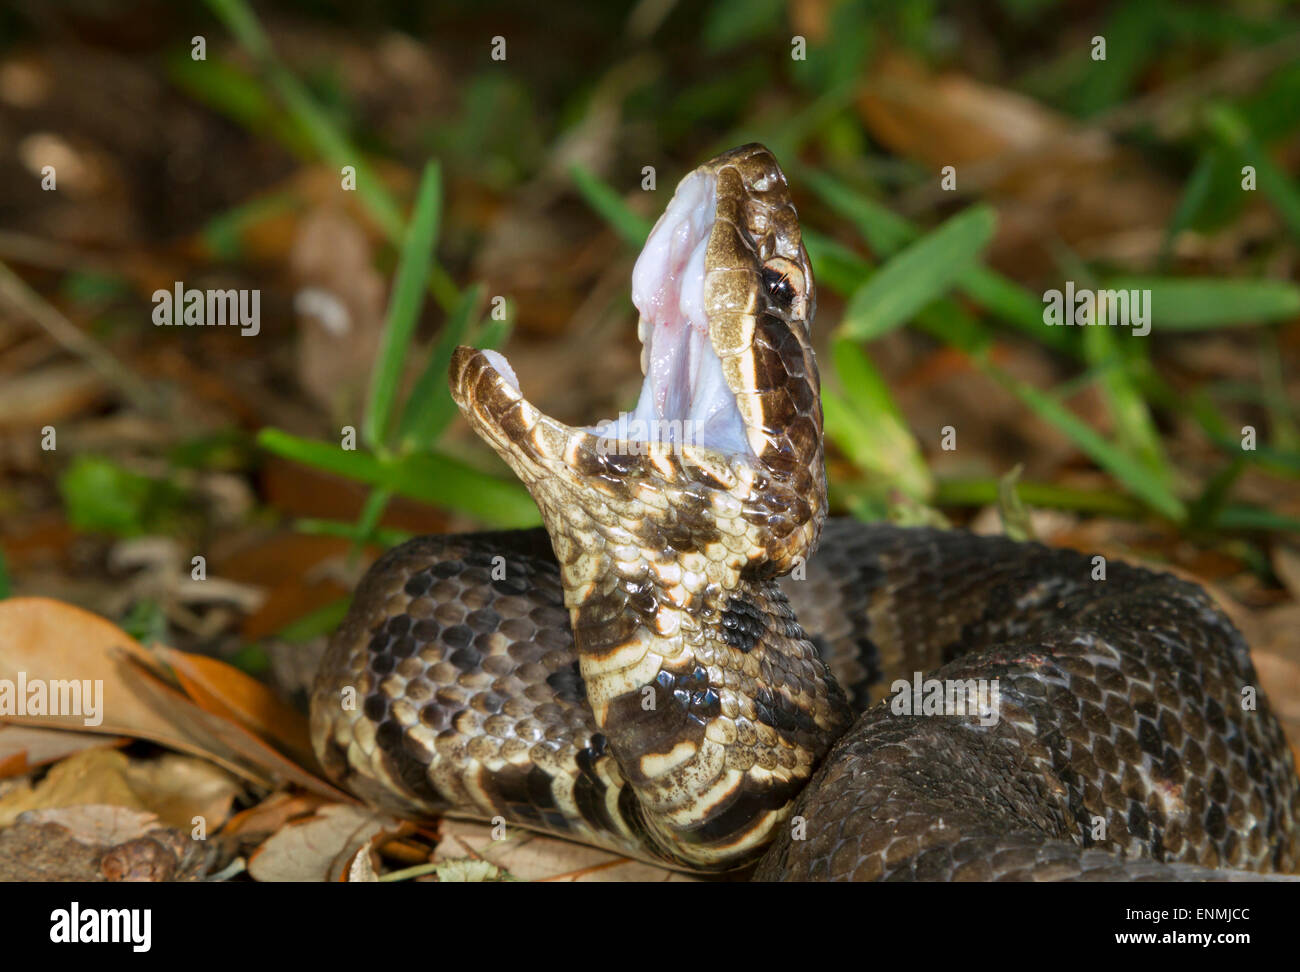 Cottonmouth or Water Moccasin (Agkistrodon piscivorus) displaying the white mouth in an attempt to threat an intruder, Galveston Stock Photo